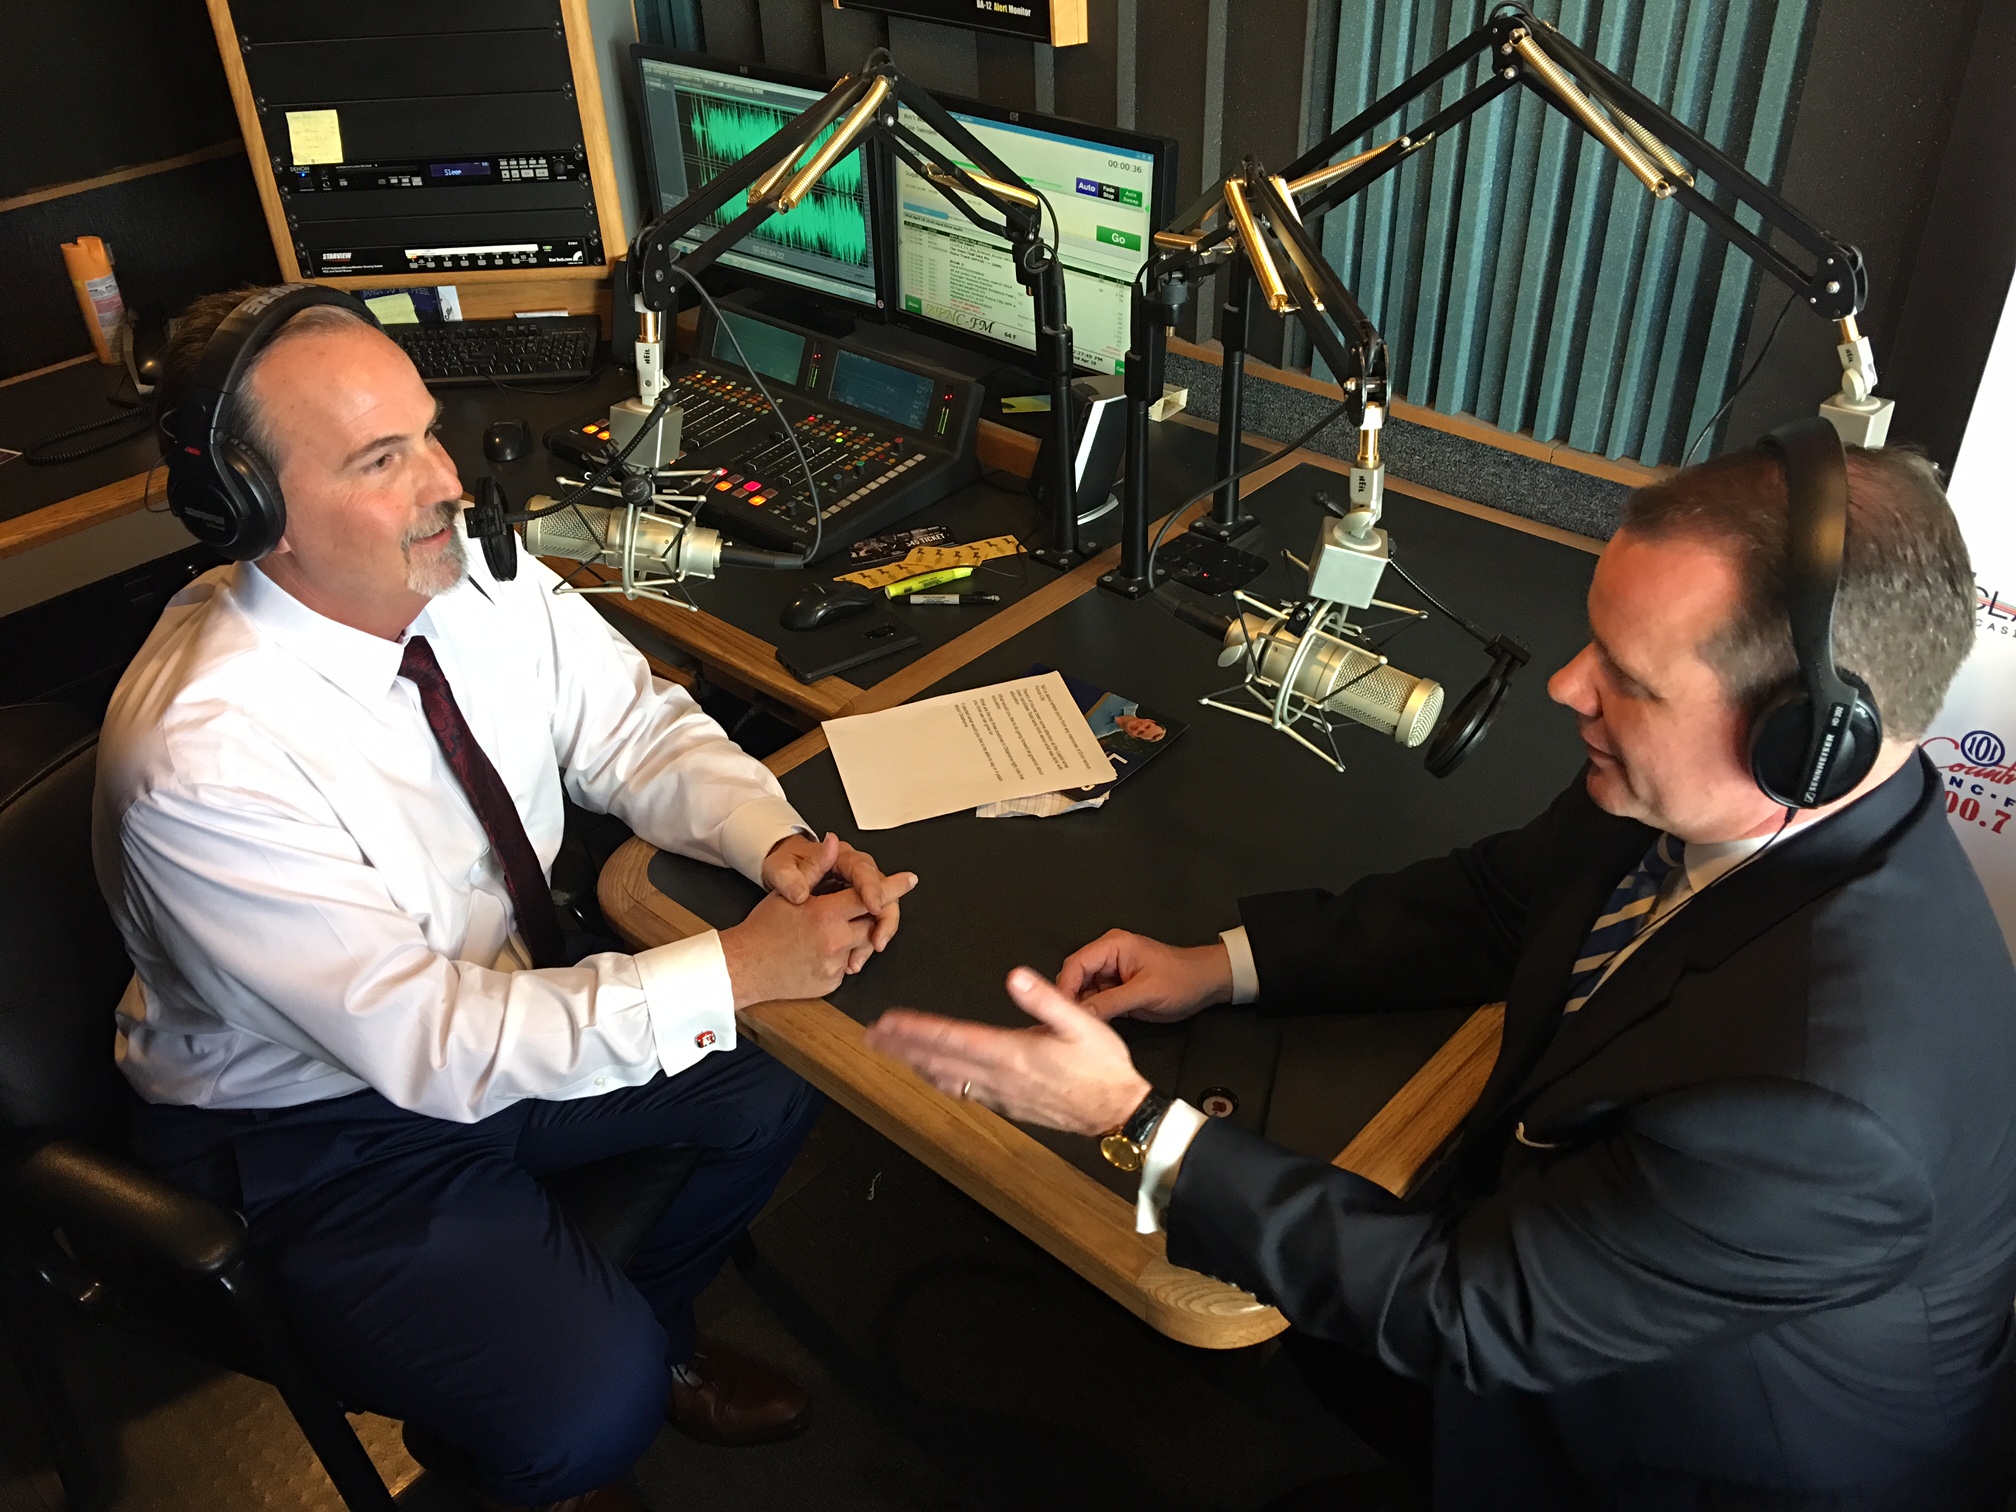 An interview with Lt. Gov. Todd Lamb